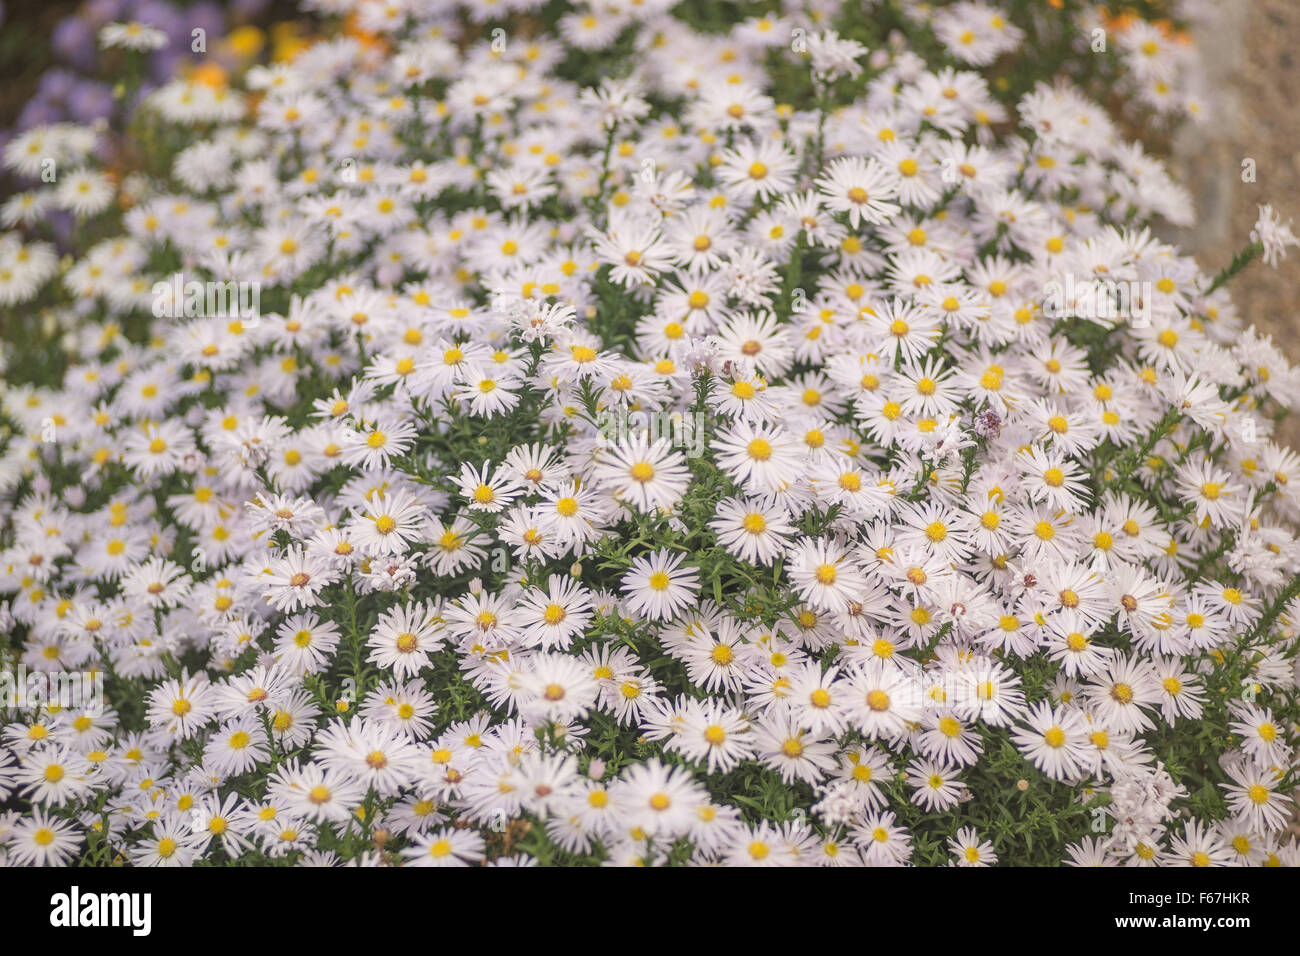 Lots of white autumn aster flowers in full bloom Stock Photo